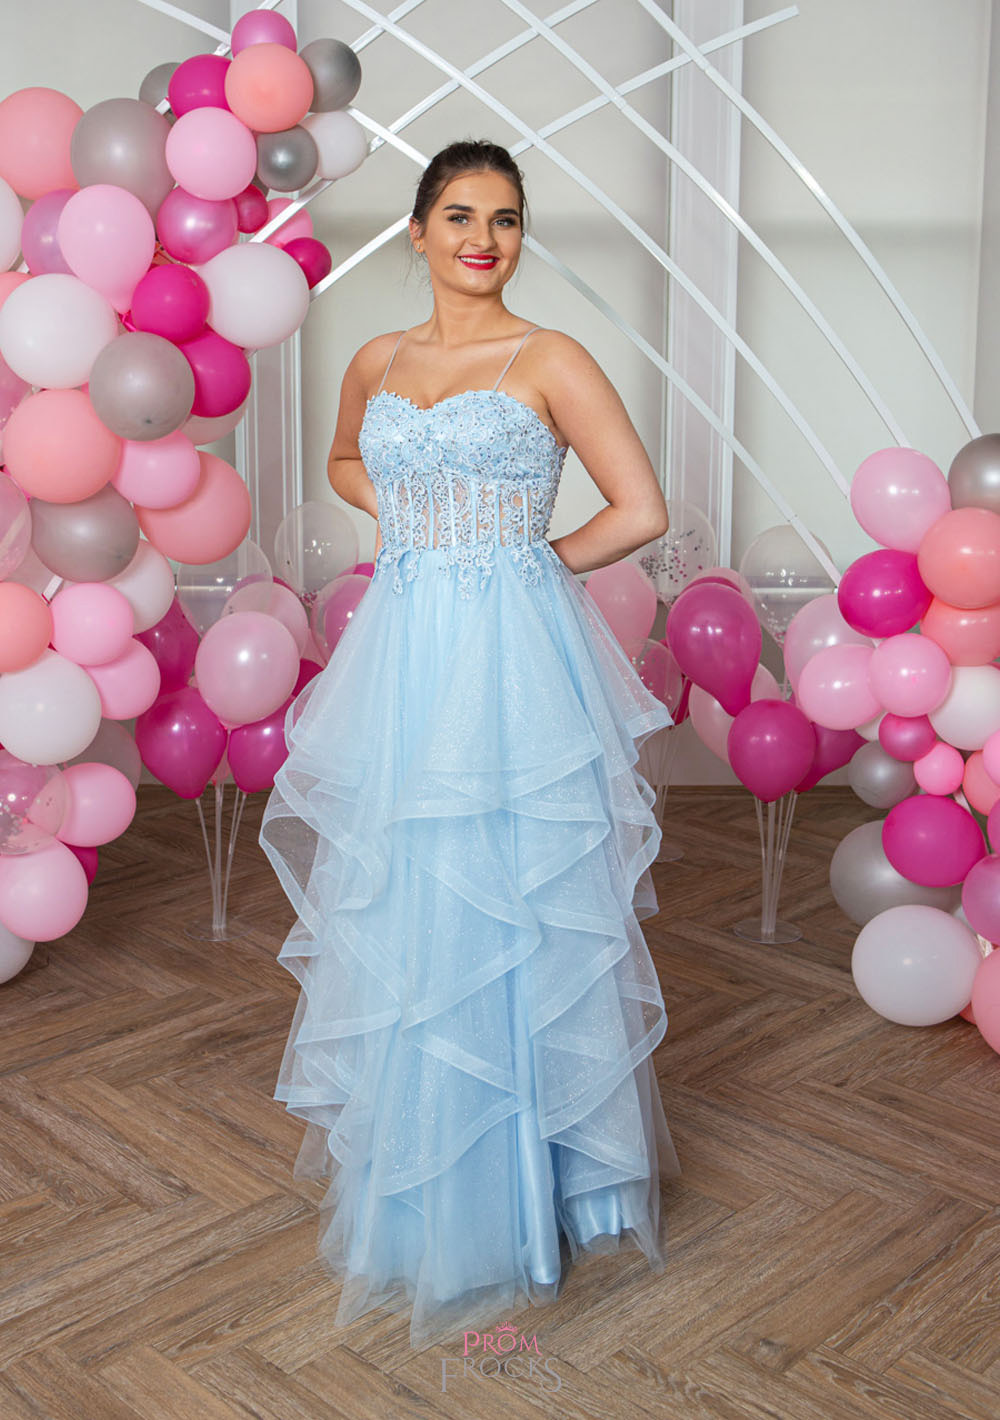 The Rachael Dress from MK Prom in Porcelain Sky blue